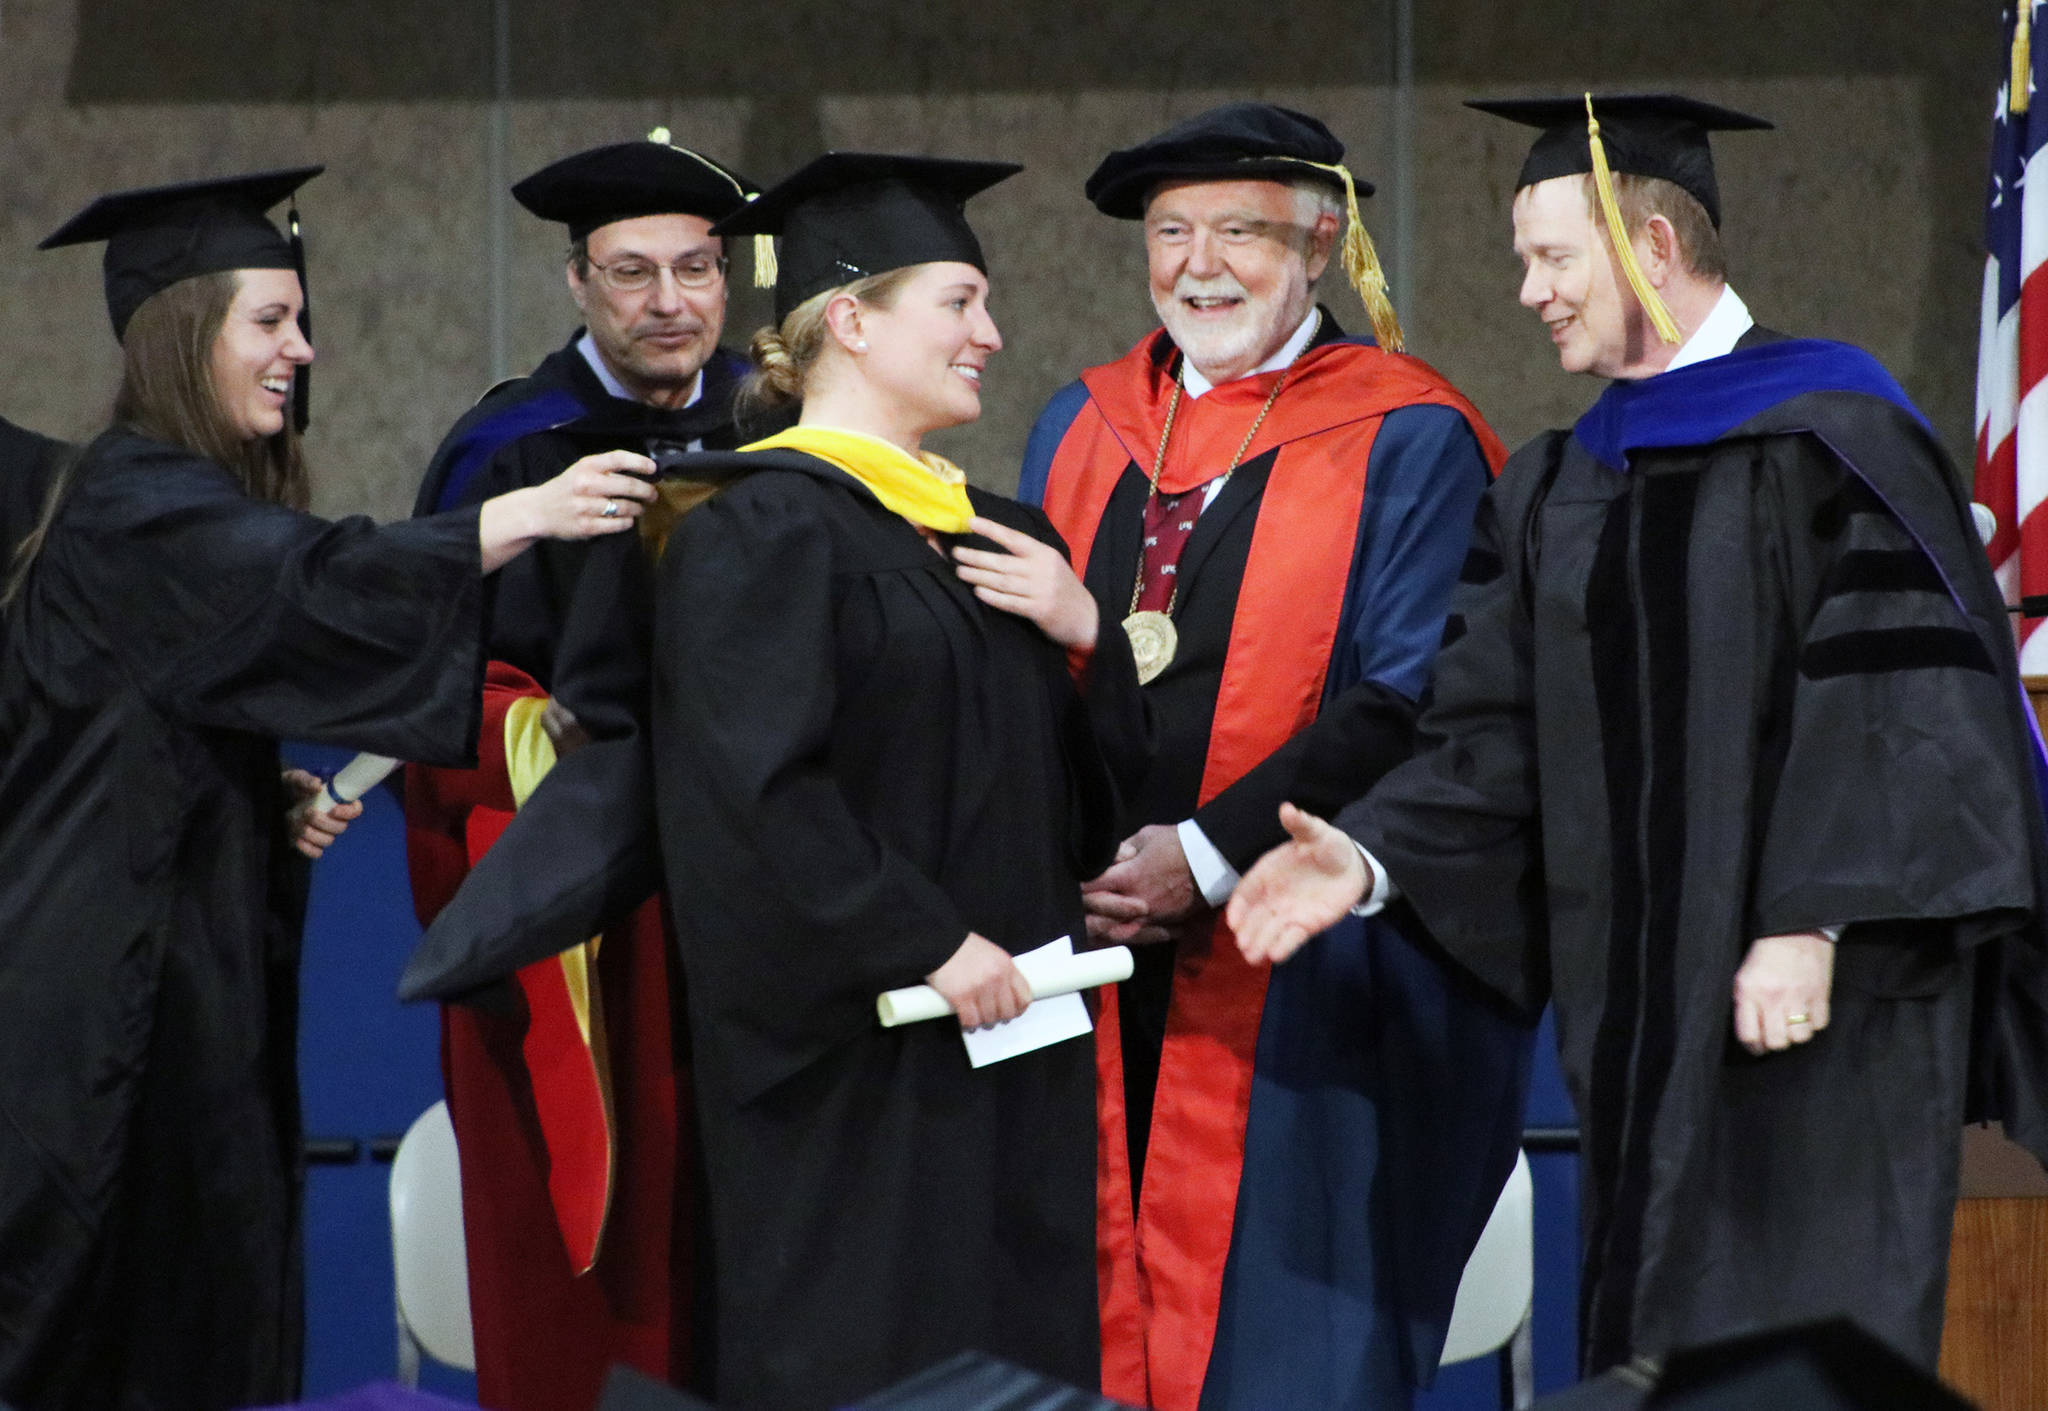 University of Alaska Southeast Chancellor Richard Caulfield, second from right, congratulates a graduate during Sunday’s commencement ceremony at the UAS Recreation Center. UAS awarded 399 associate, bachelor and master’s degrees, 97 certificates and professional licensures, and 223 occupational endorsements this year. (Erin Laughlin | For the Juneau Empire)